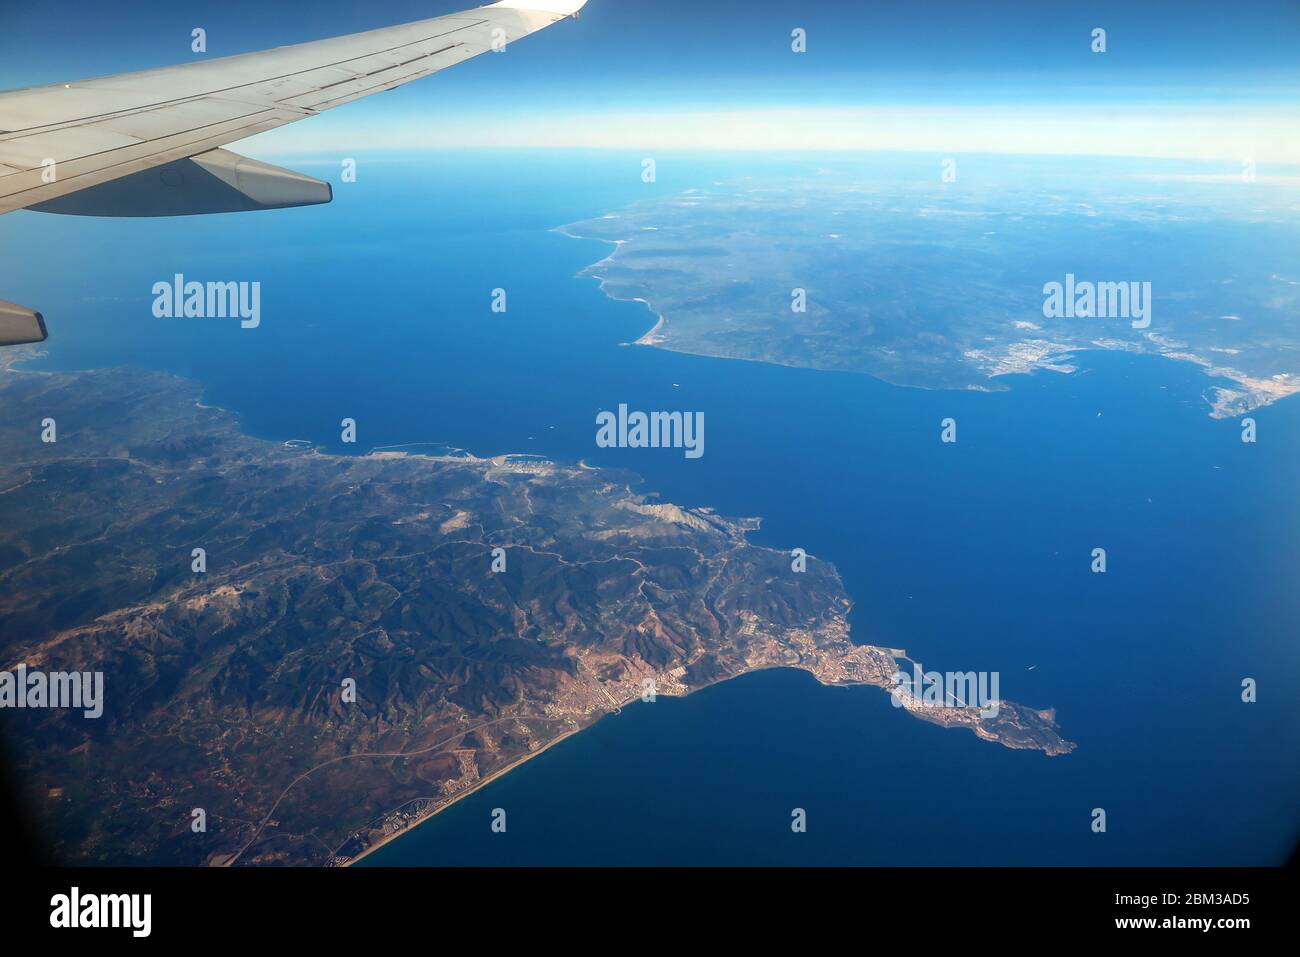 Aerial photo of the Strait of Gibraltar, Spain and Morocco Stock Photo